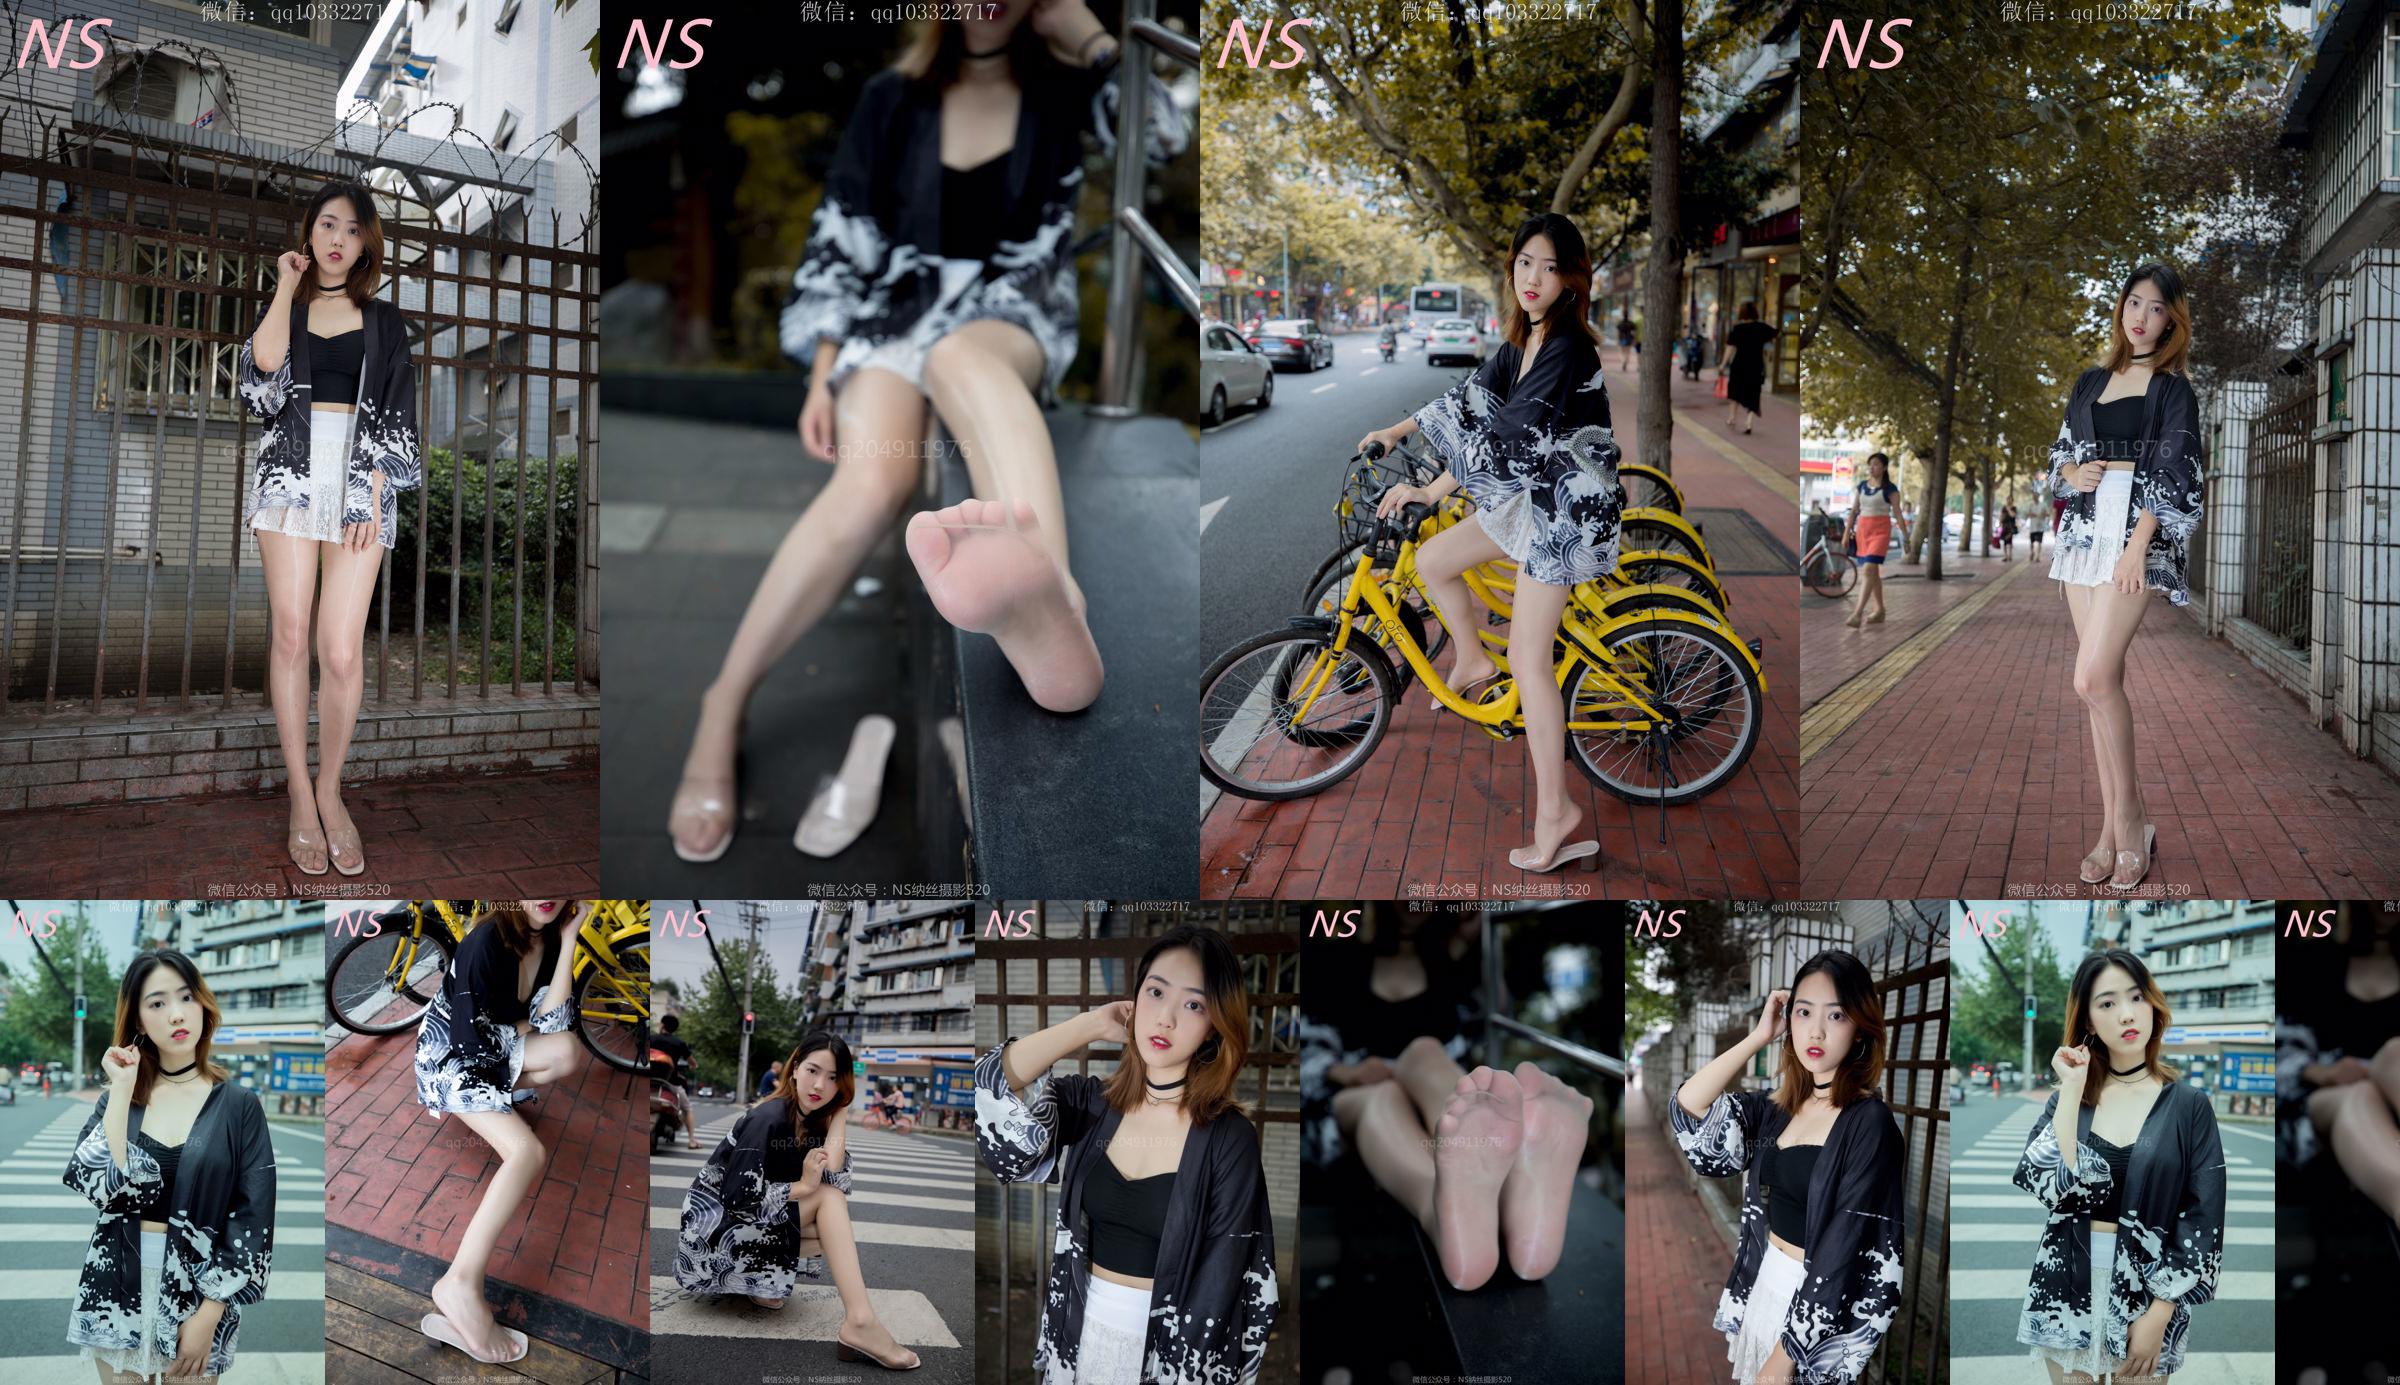 Man Wen "A Trip to a Tricycle in Flesh-colored Stockings and Beautiful Legs" [Nass Photography] No.fc1fa9 Page 41